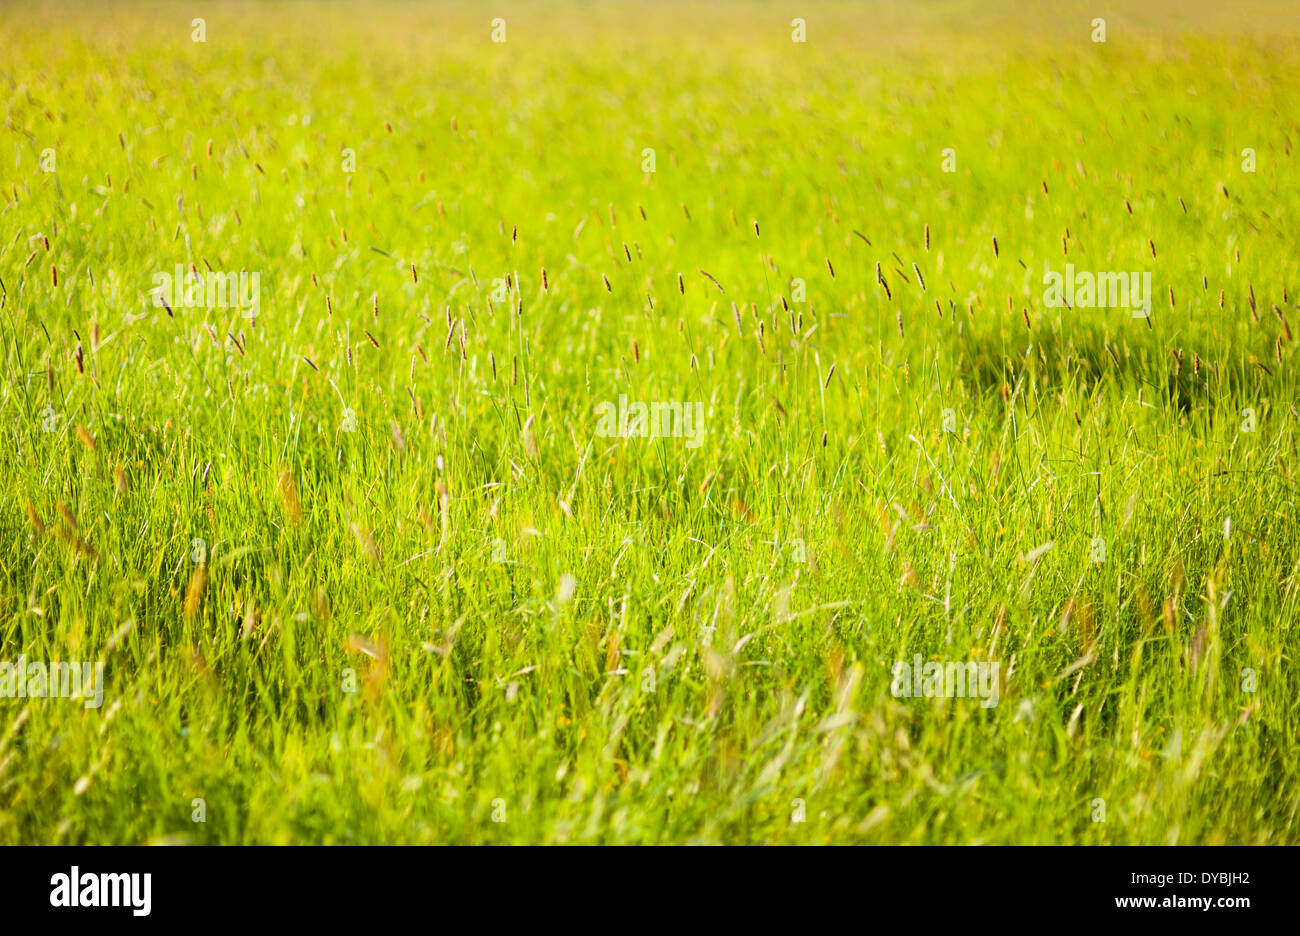 Meadow with tall grass and selective focus Stock Photo